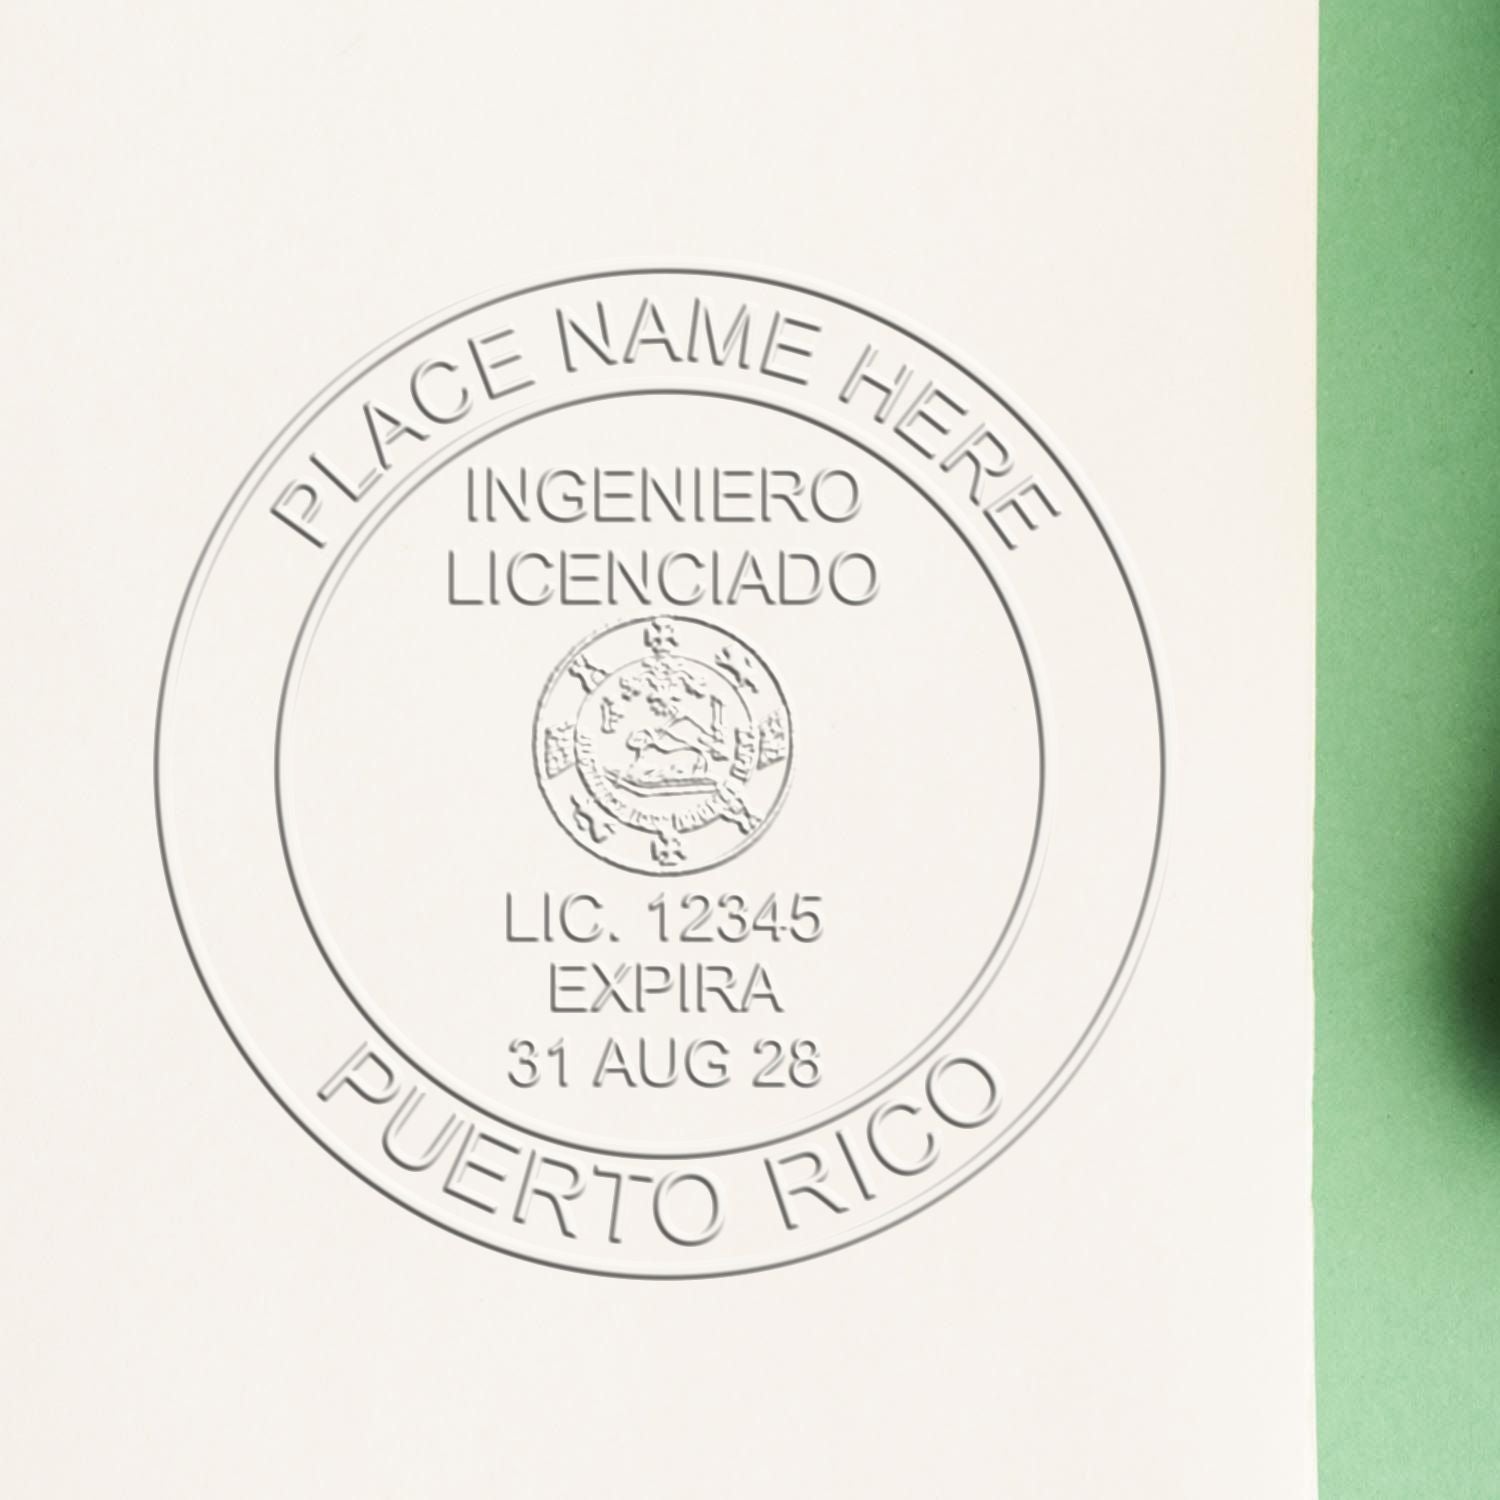 A stamped impression of the Puerto Rico Engineer Desk Seal in this stylish lifestyle photo, setting the tone for a unique and personalized product.